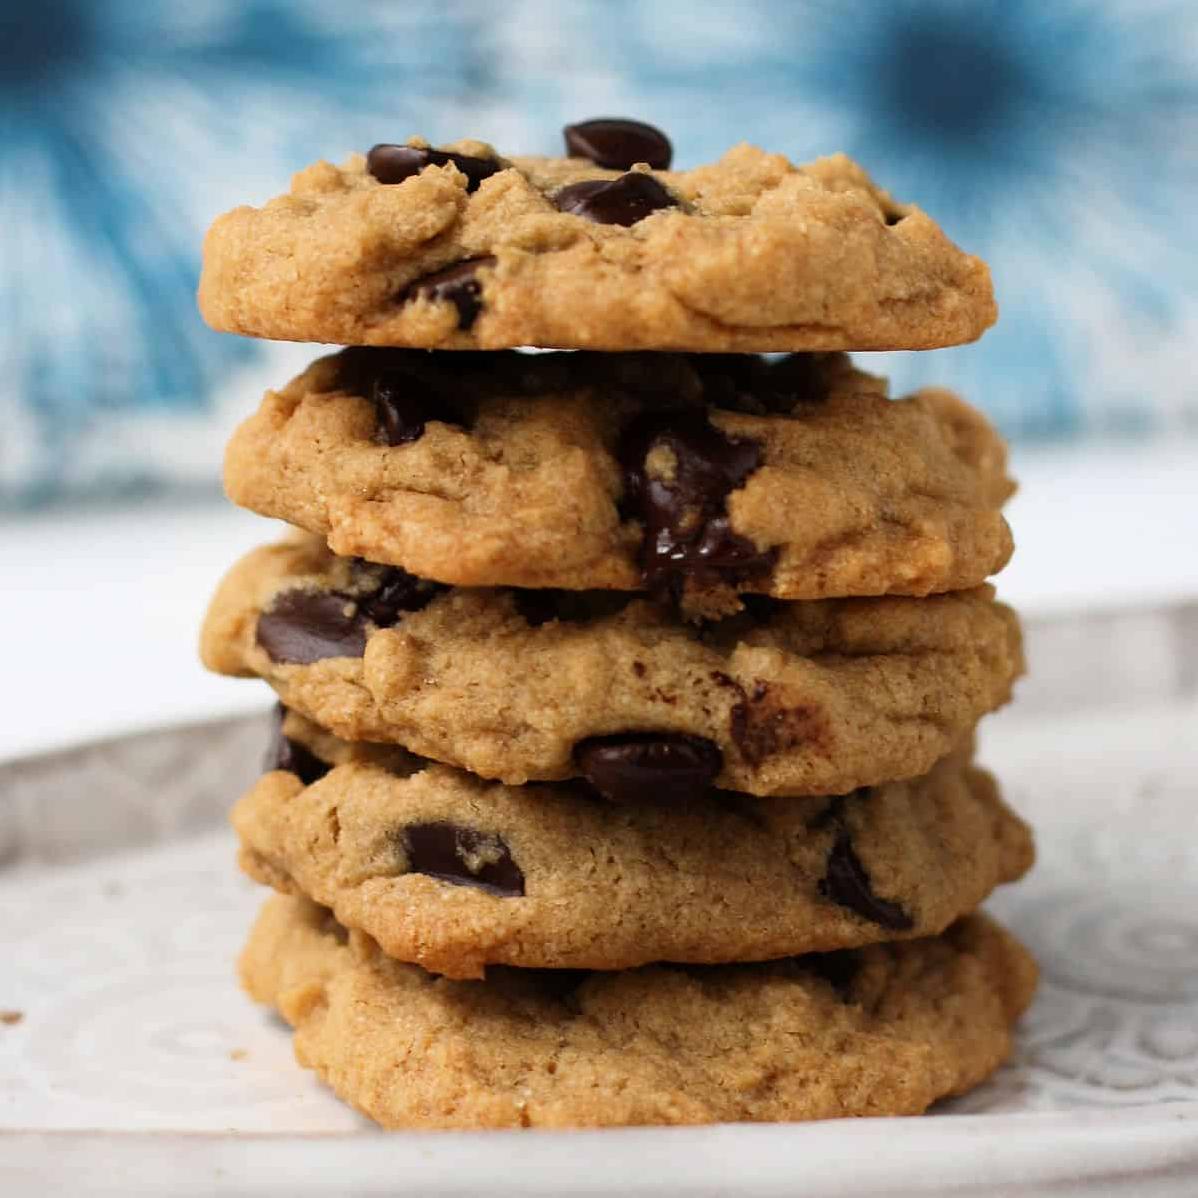  A perfect treat for those with dietary restrictions or anyone who loves a good chocolate chip cookie.